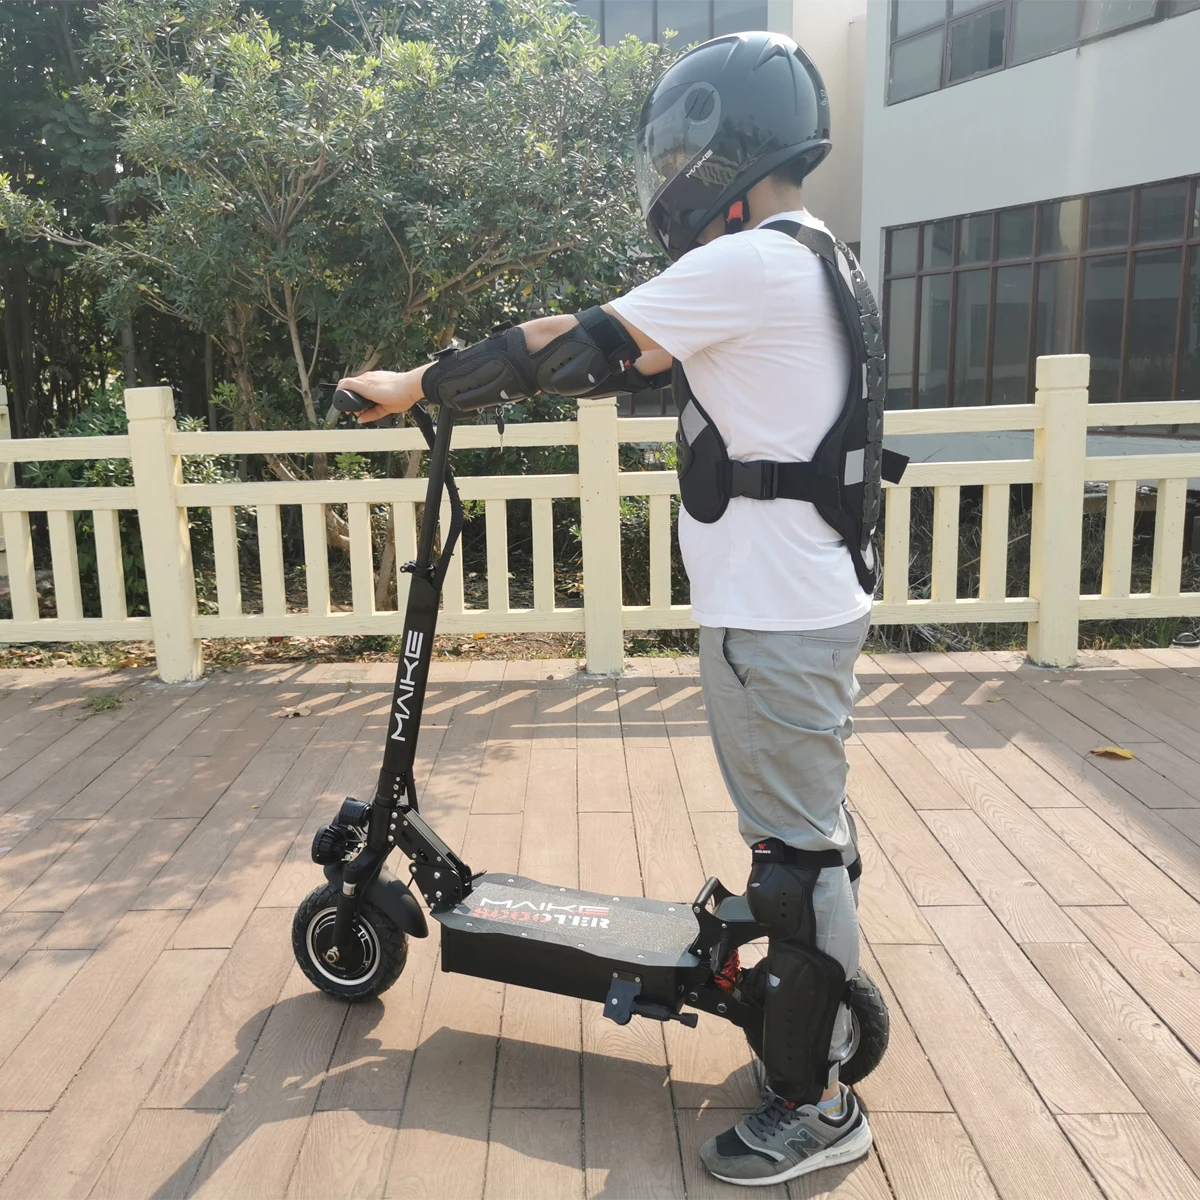 

Competitive Price Hot Sale Maike mk6 10 inch wide wheel 1000w 2000w dual hub motor scooter off road electric kick scooters